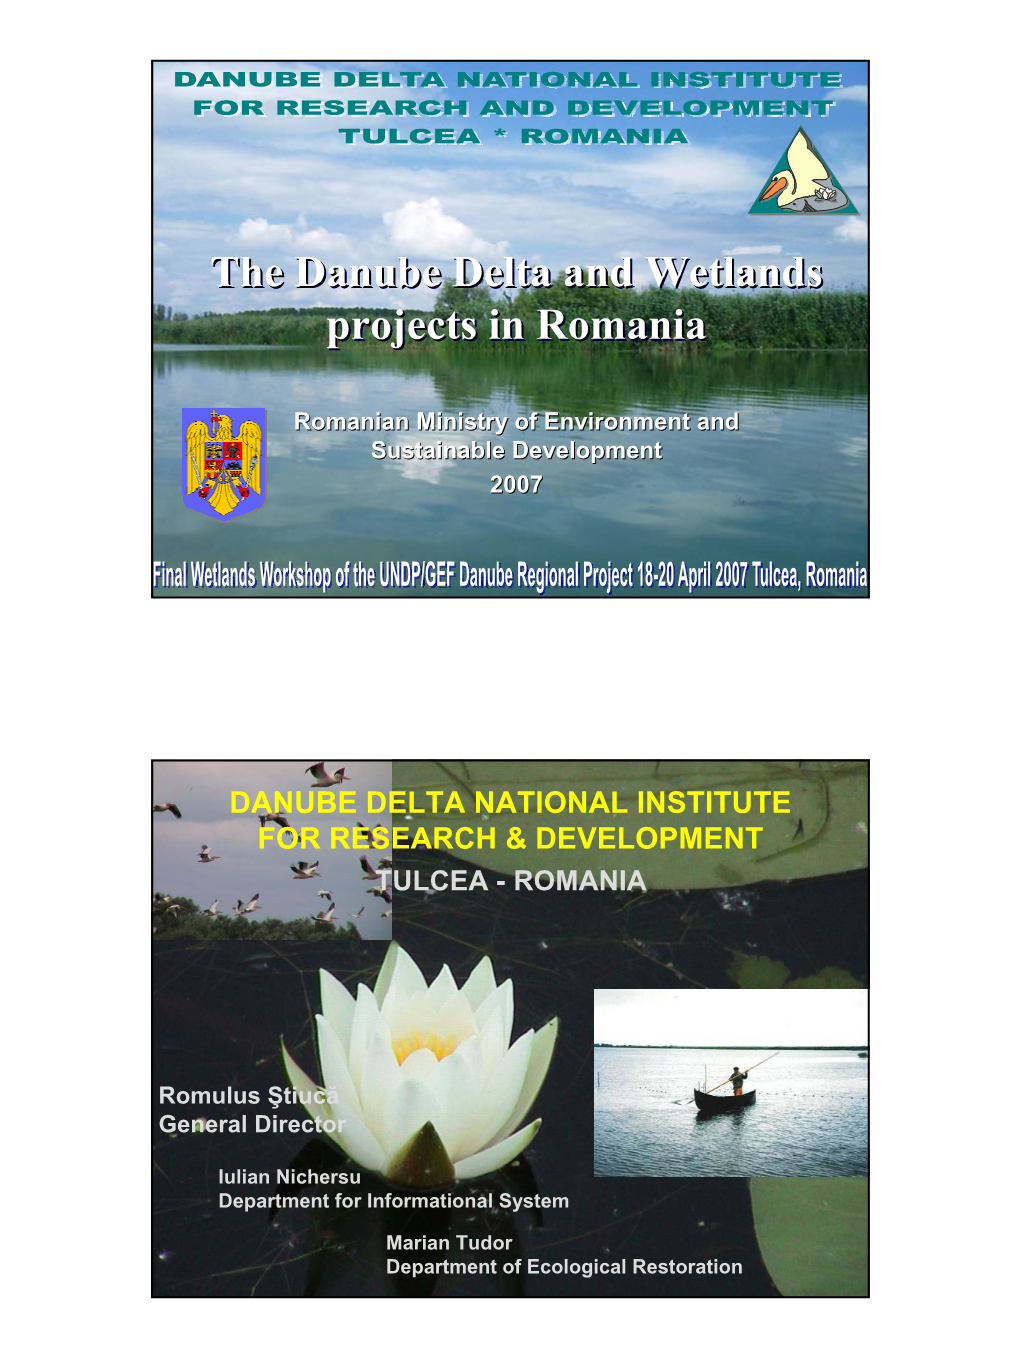 The Danube Delta and Wetlands Projects in Romania